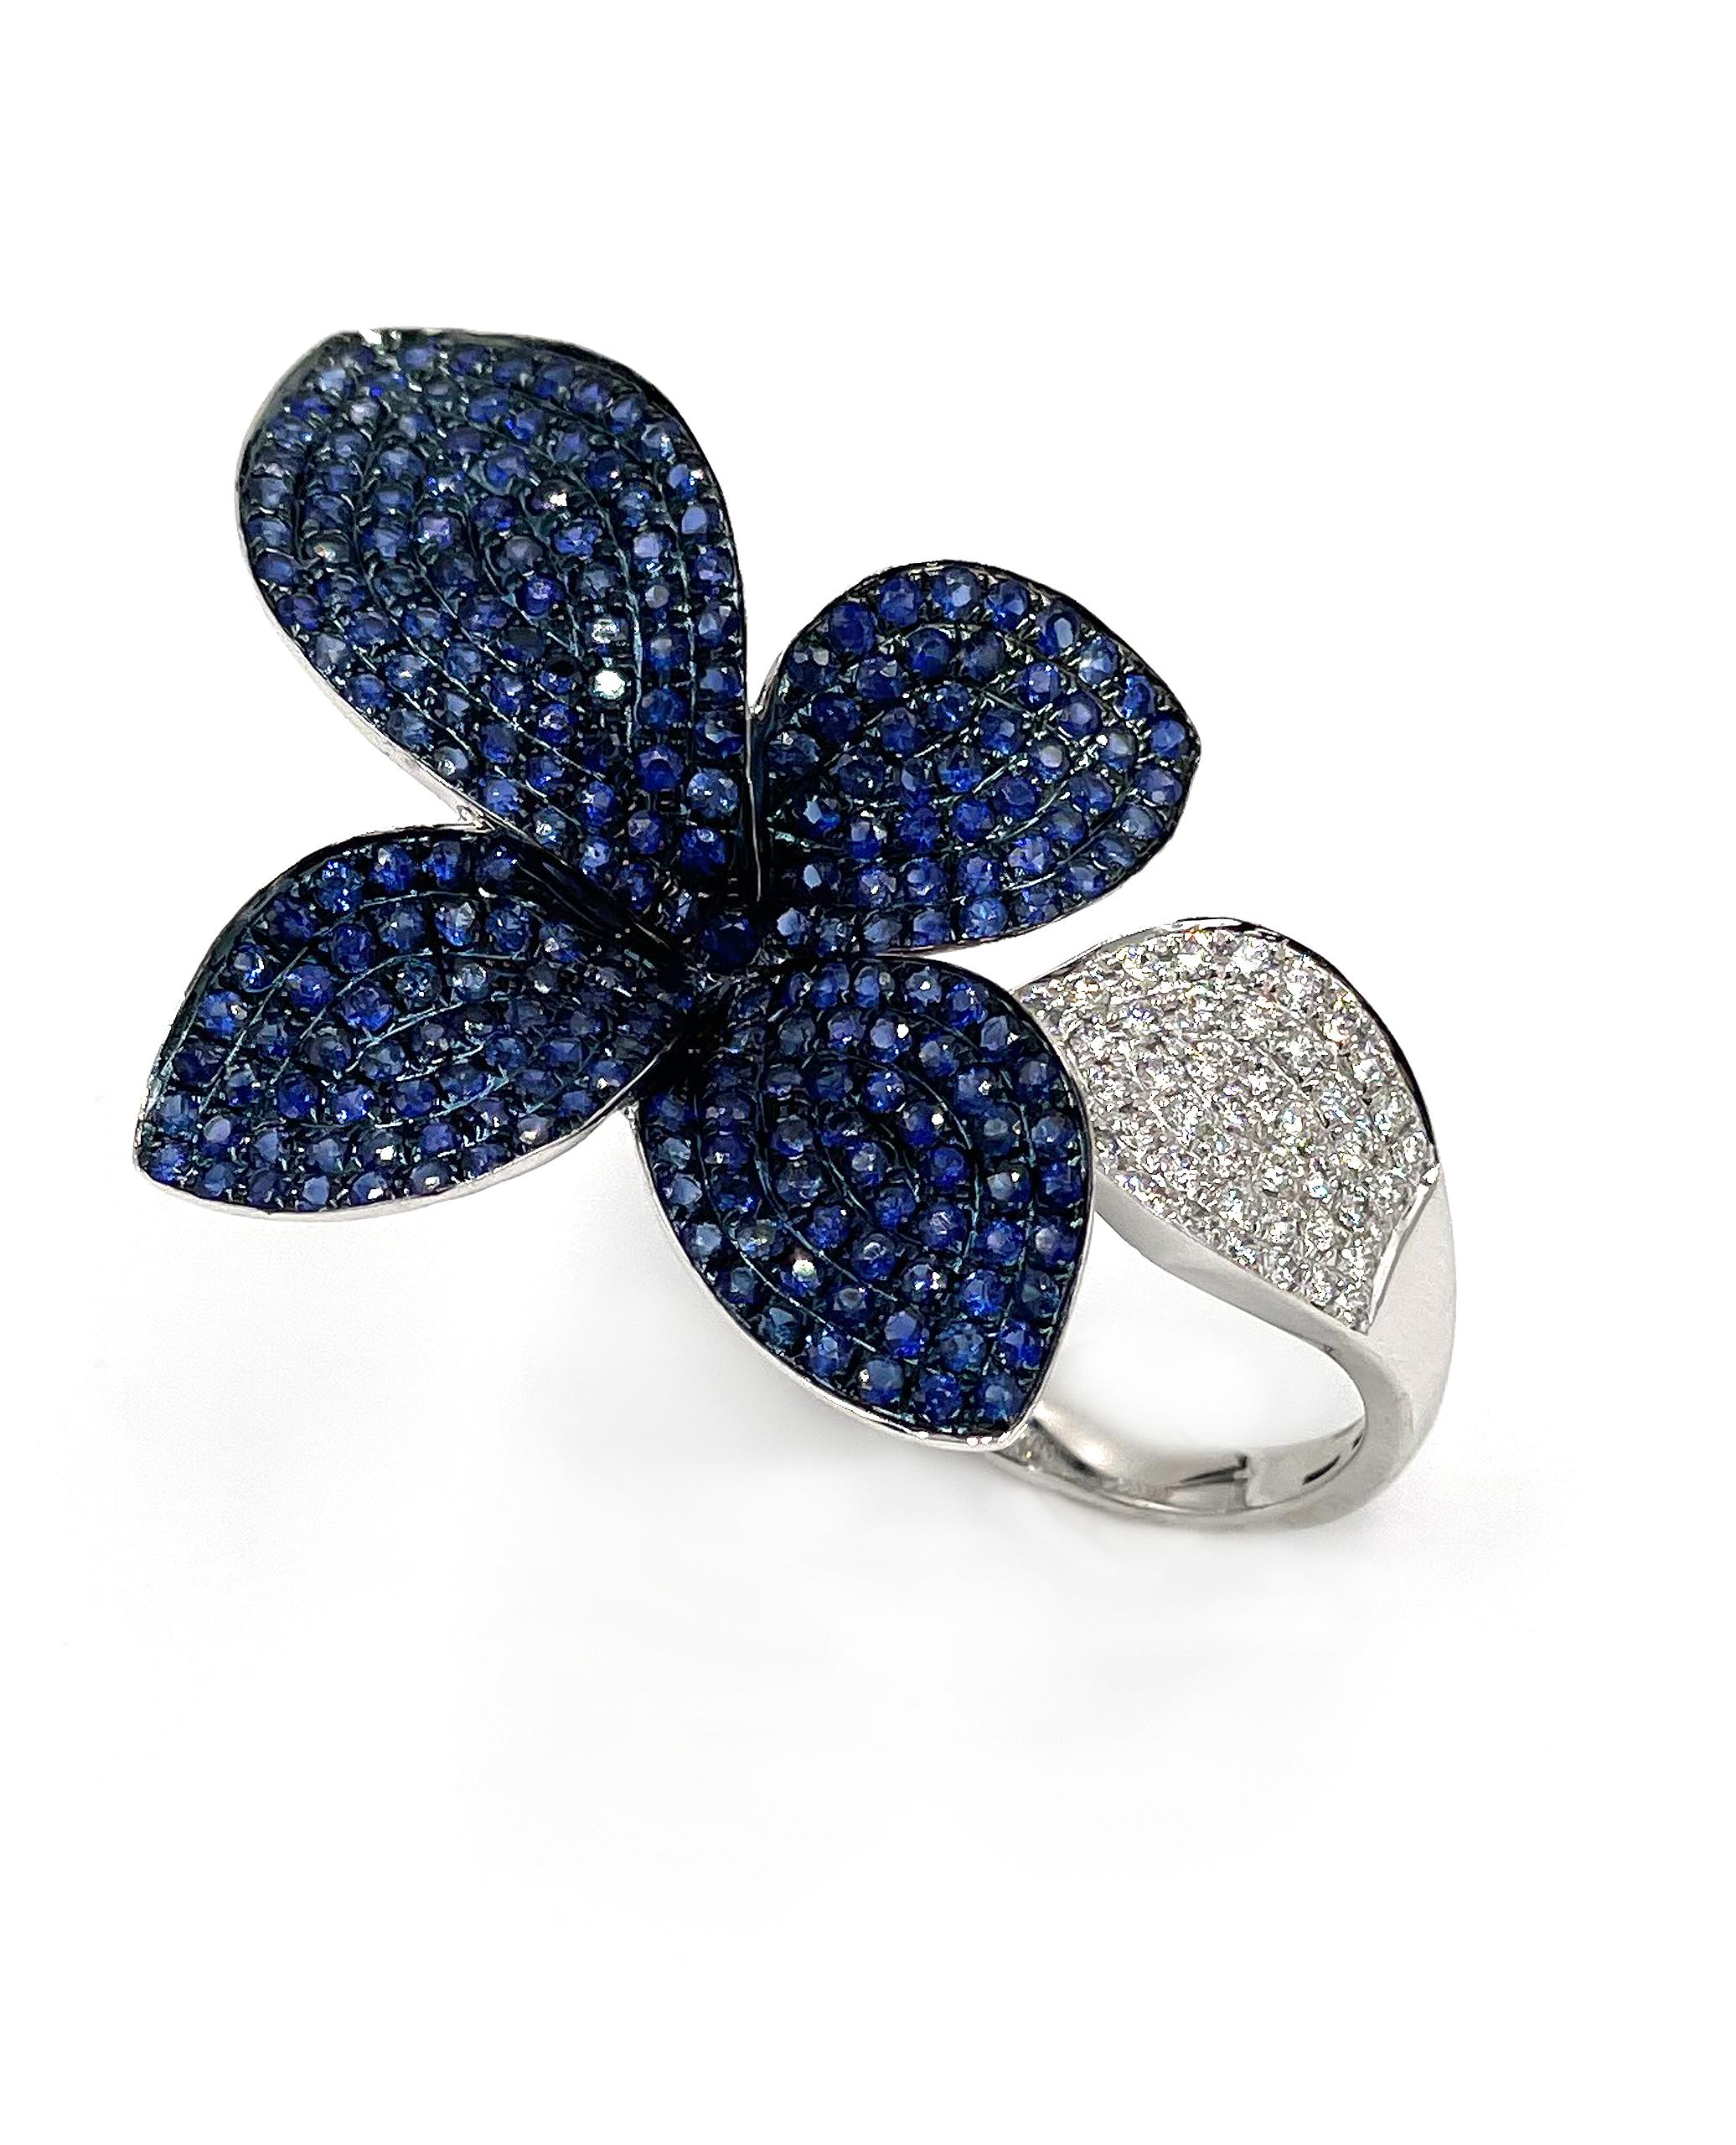 Round Cut Organic Flower Ring with Sapphires and Diamonds, 18K White Gold